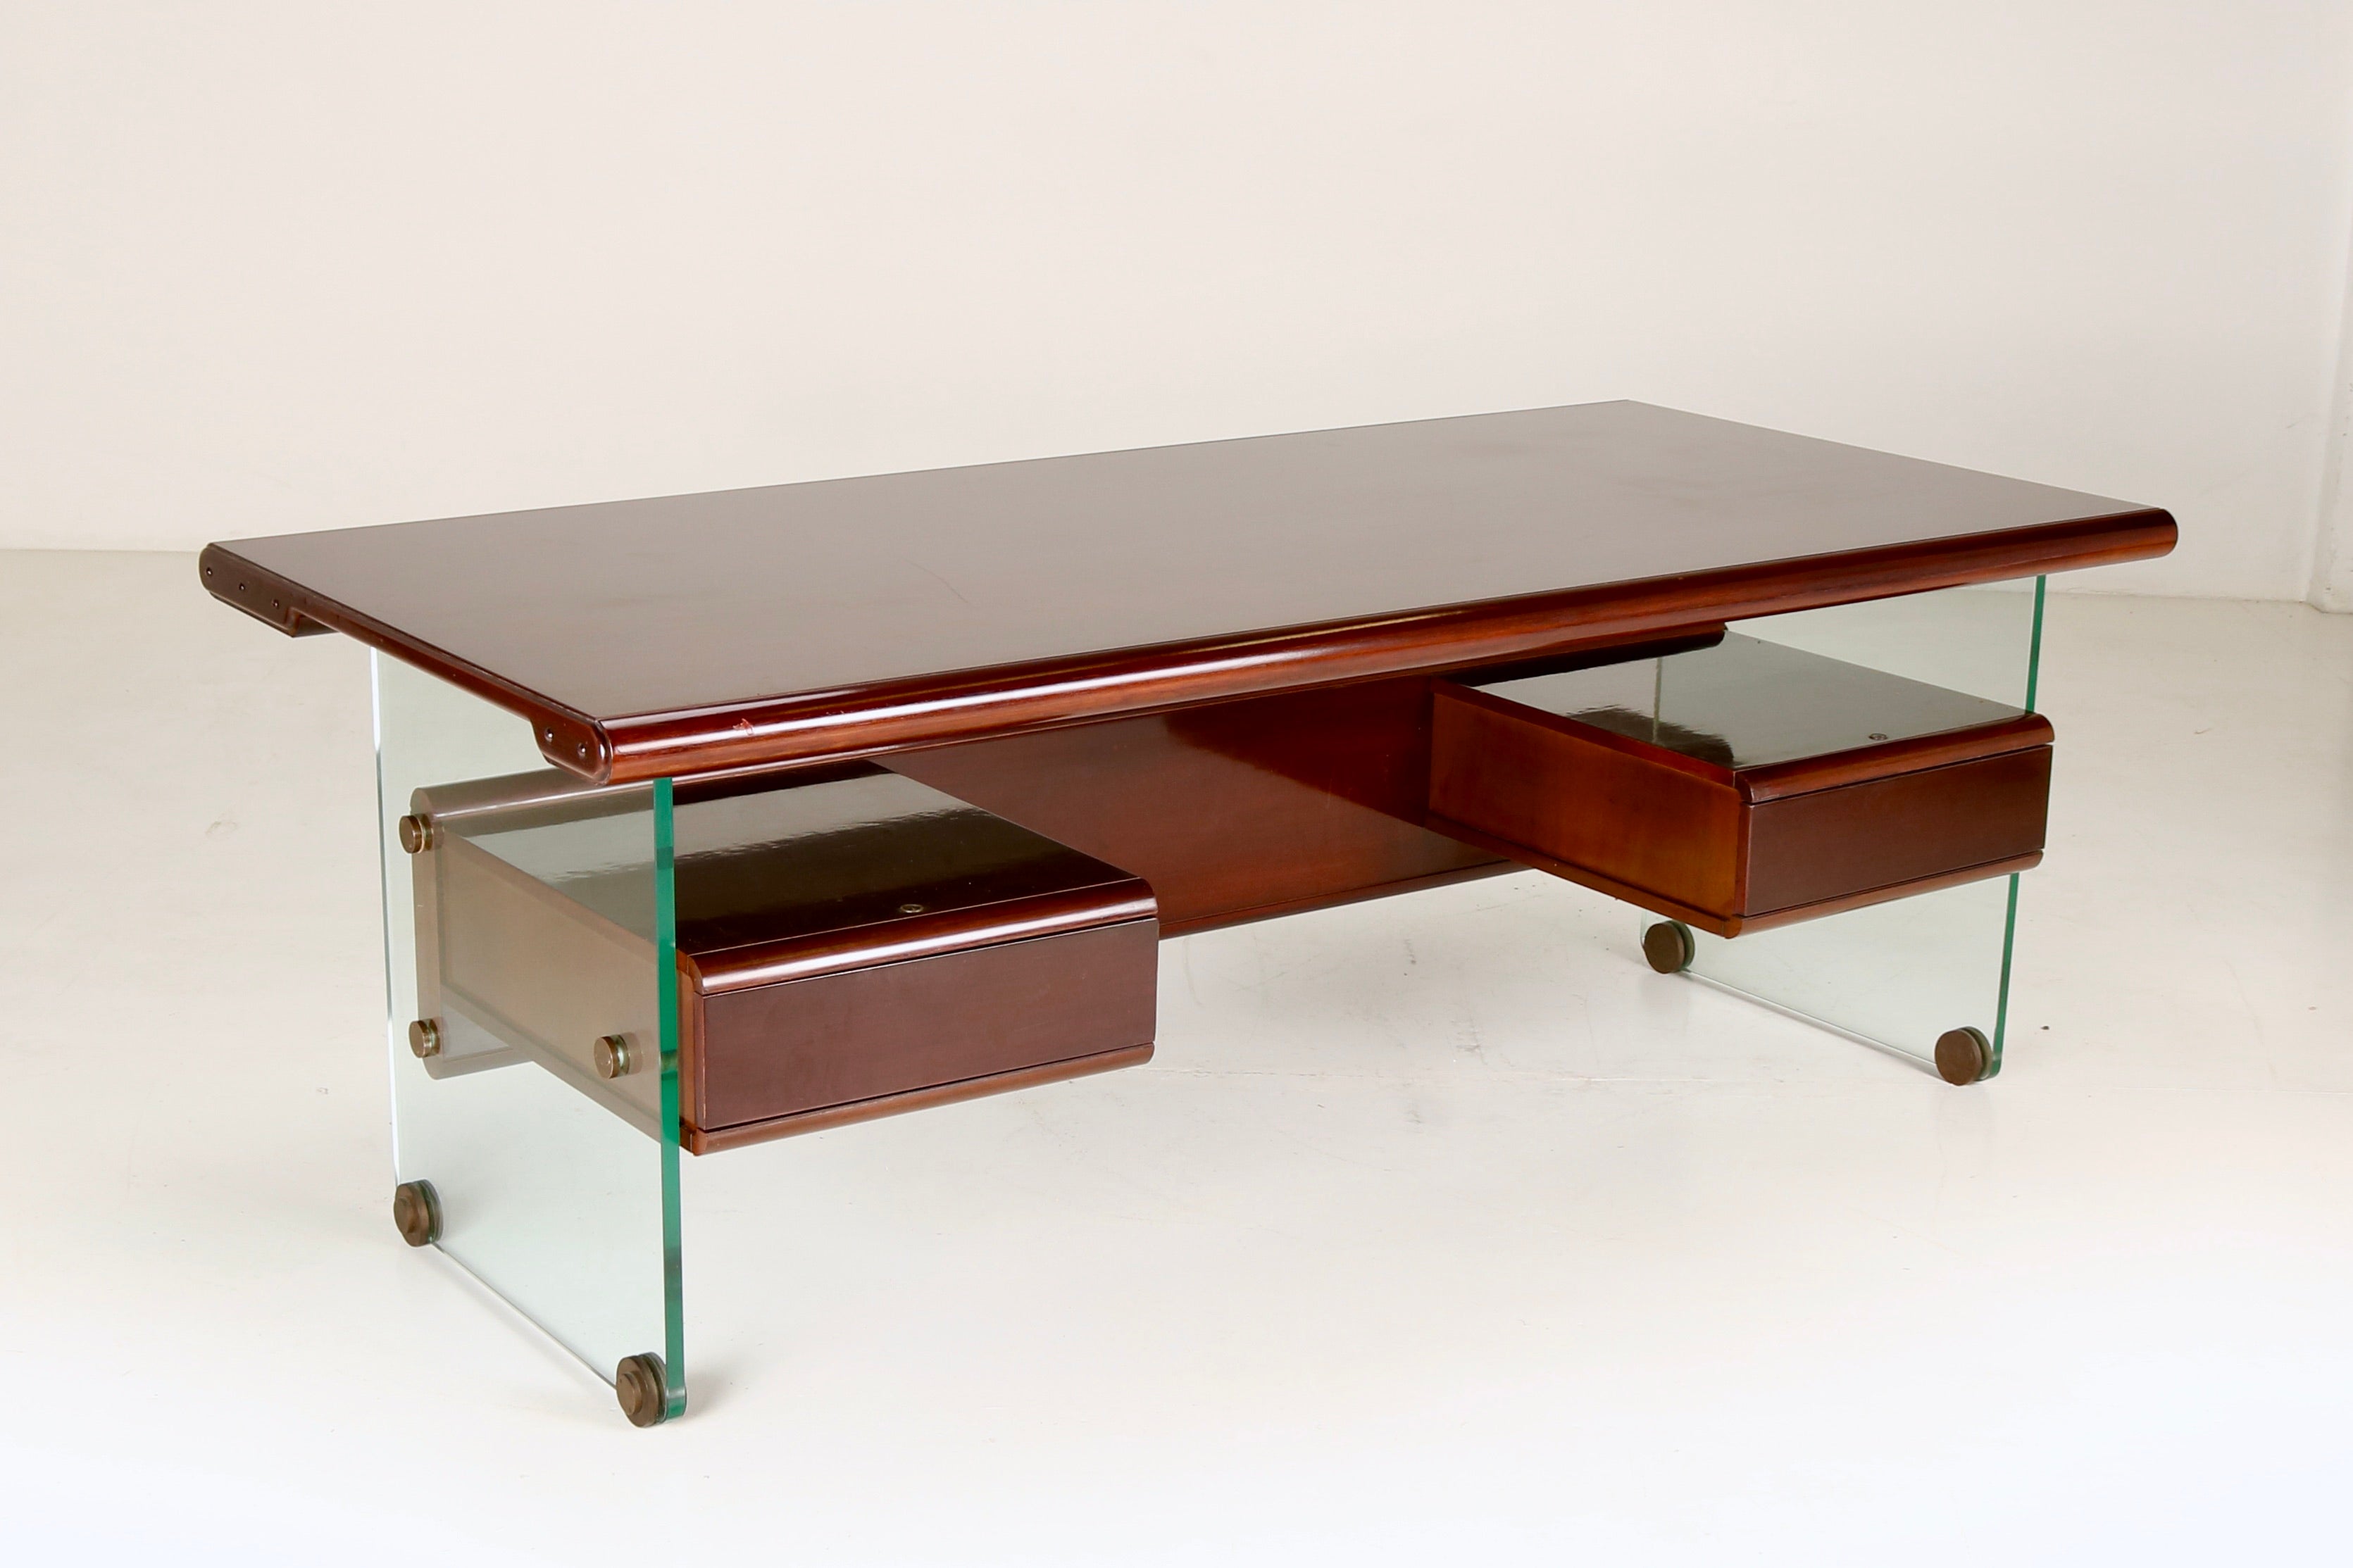  This wood and glass desk attribuited to Fabio Lenci is a gorgeous piece of Italian design. Meticulously crafted, the combination of wood and glass and its essential lines creates an harmonious and elegant workspace. The desk presidential dimensions